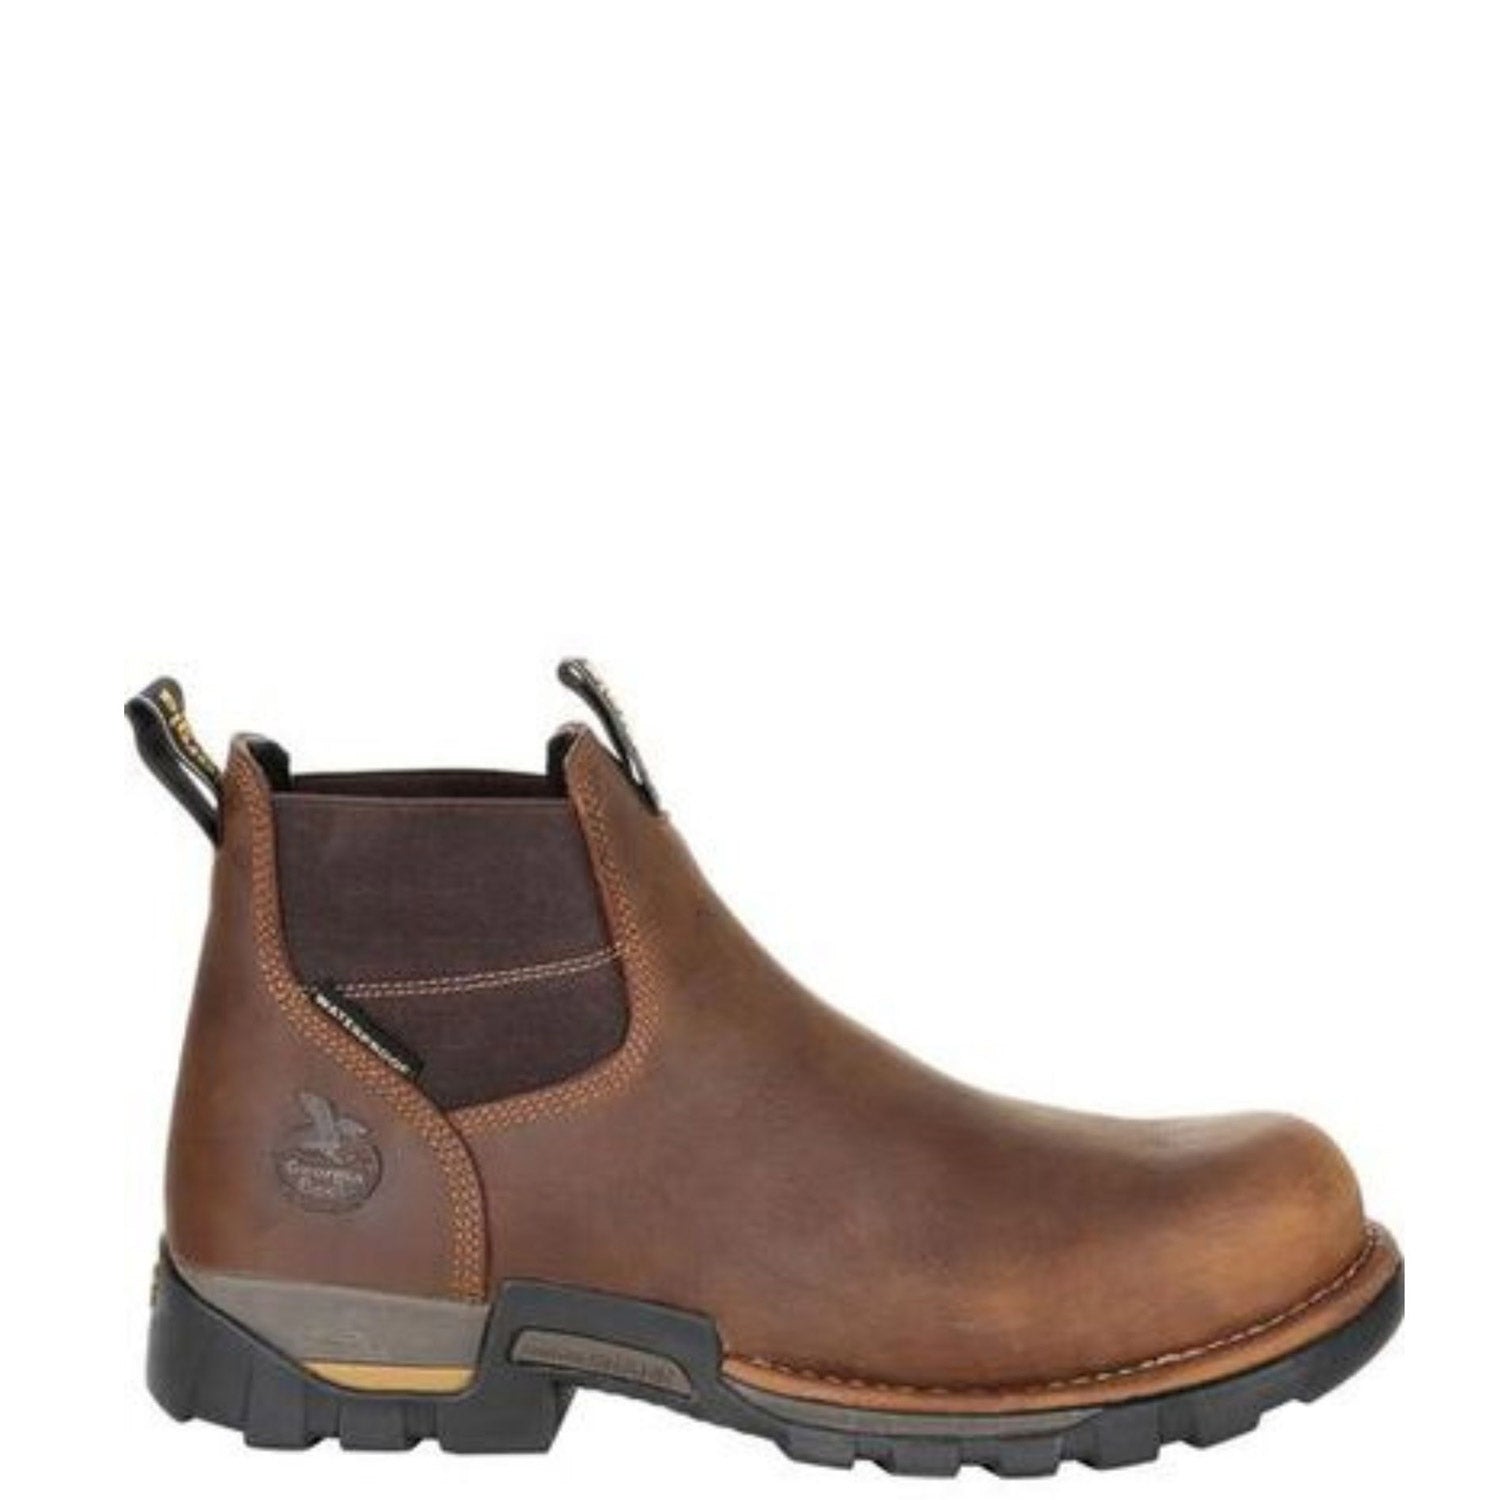 Georgia Boot Men's 4" Eagle One Waterproof EH Soft Toe Chelsea Boot - Work World - Workwear, Work Boots, Safety Gear